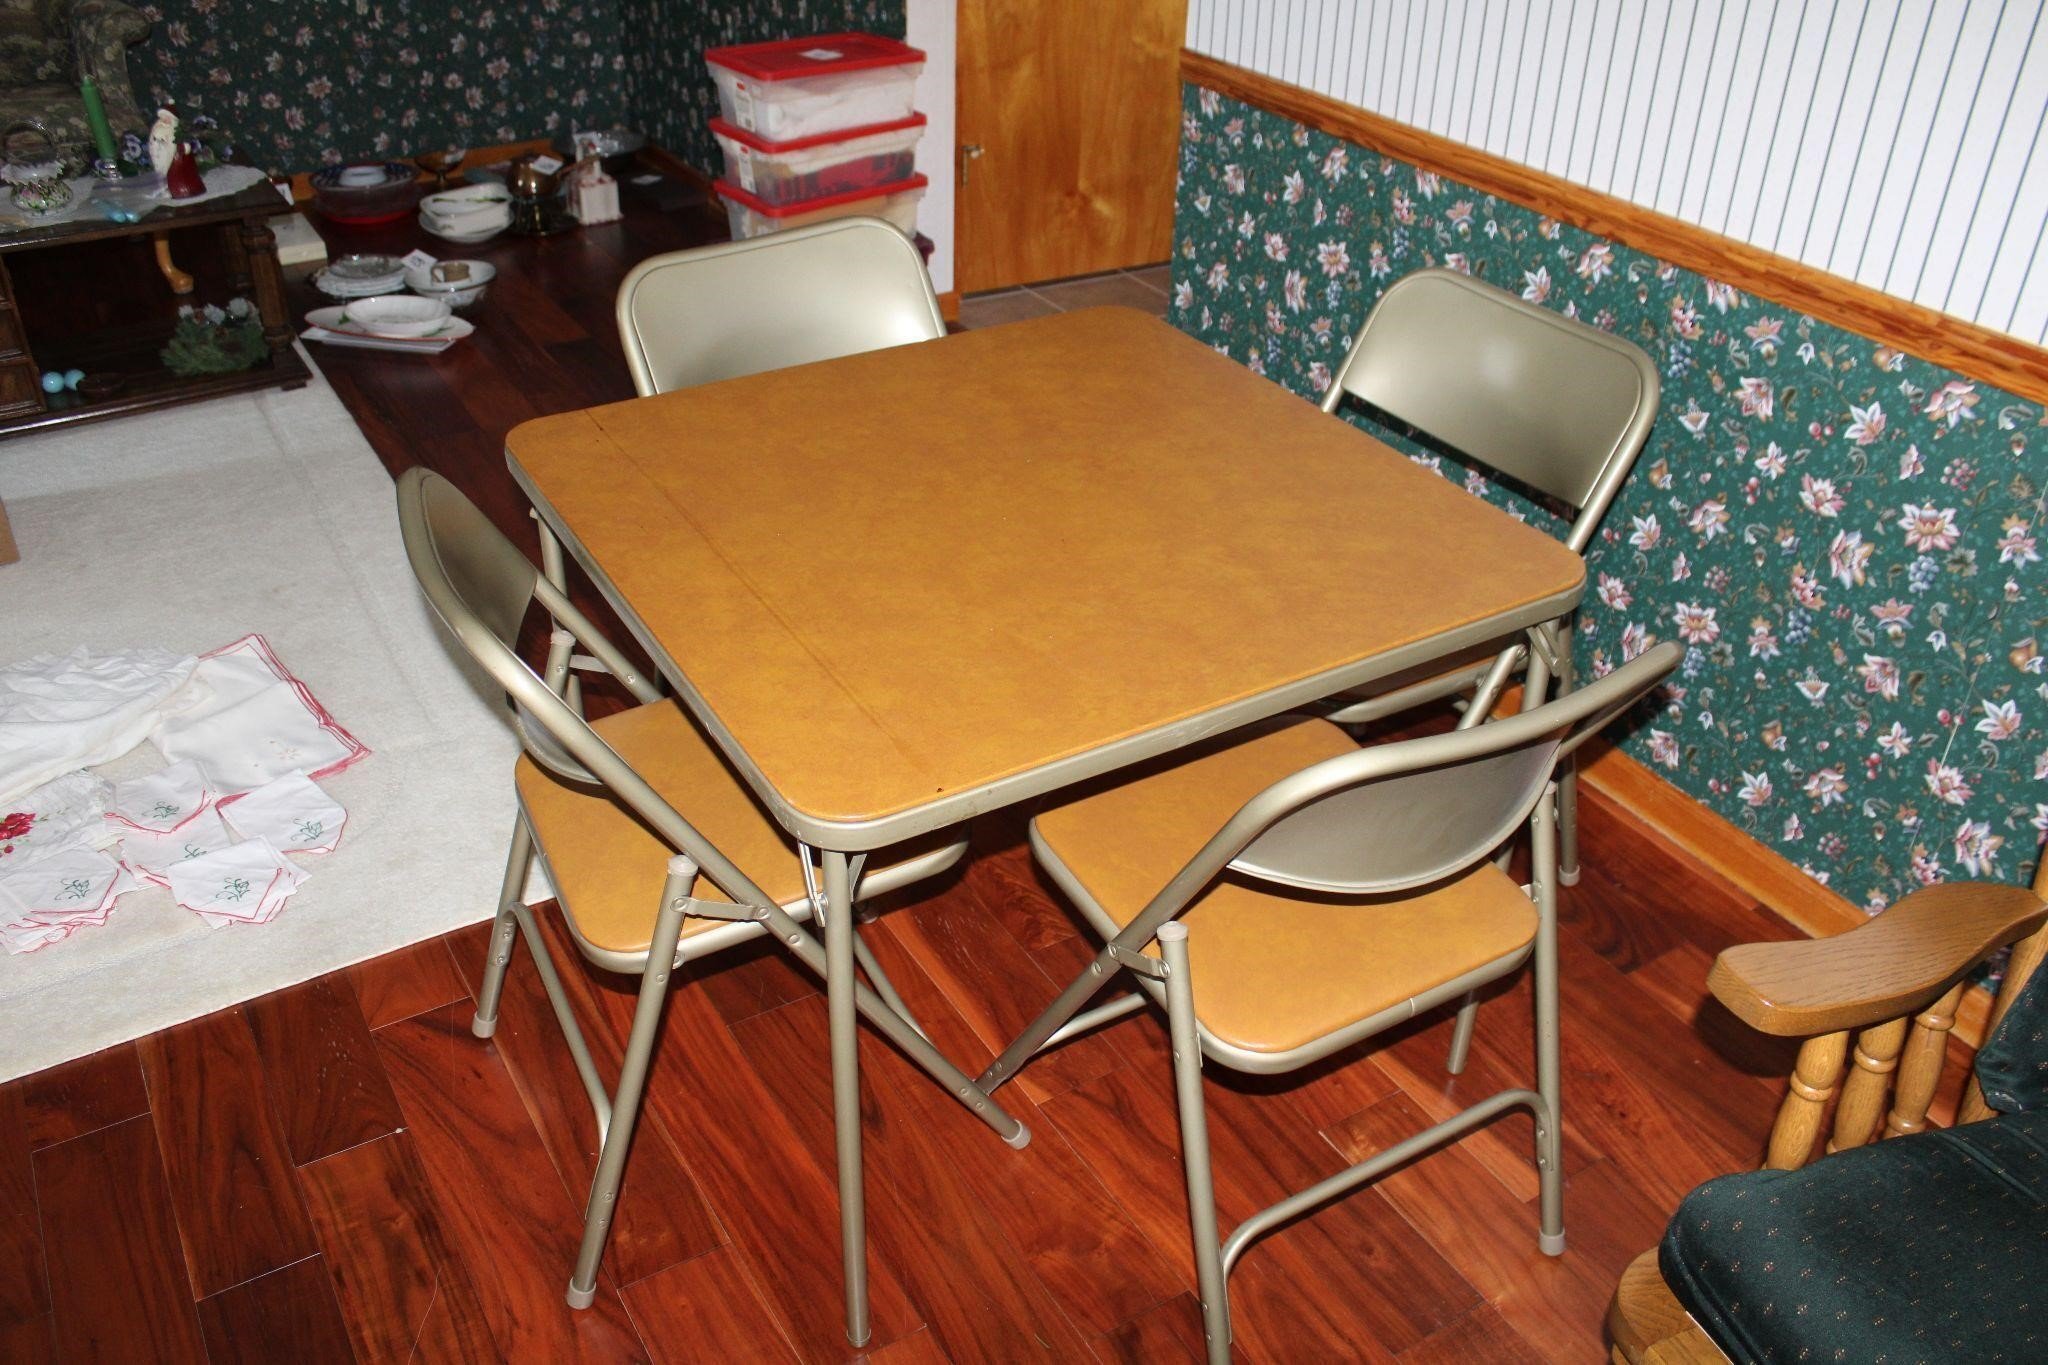 CARD TABLE WITH CHAIRS